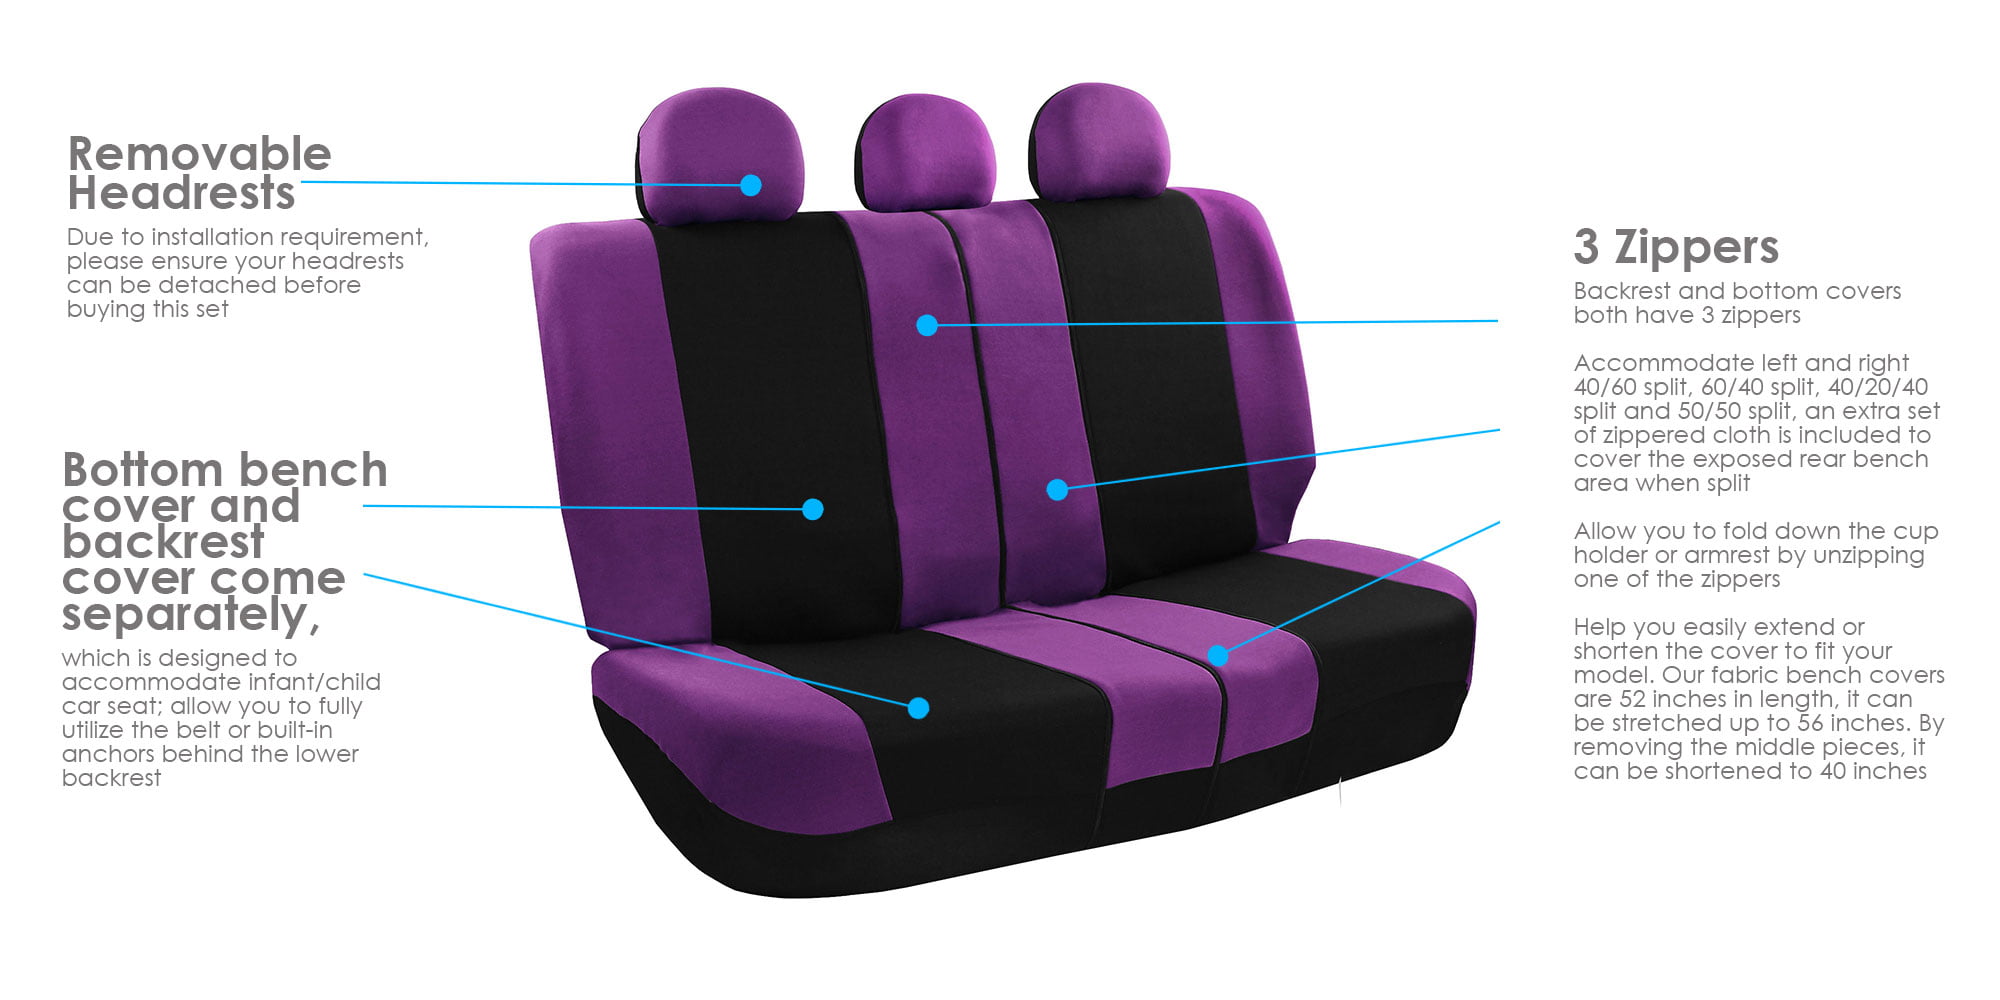 Truck FH Group FB030115 Combo Set: Light & Breezy Cloth Seat Covers Purple/Black-Fit Most Car F14407 Floor Mats FH2033 or Van SUV Airbag & Split Ready W 